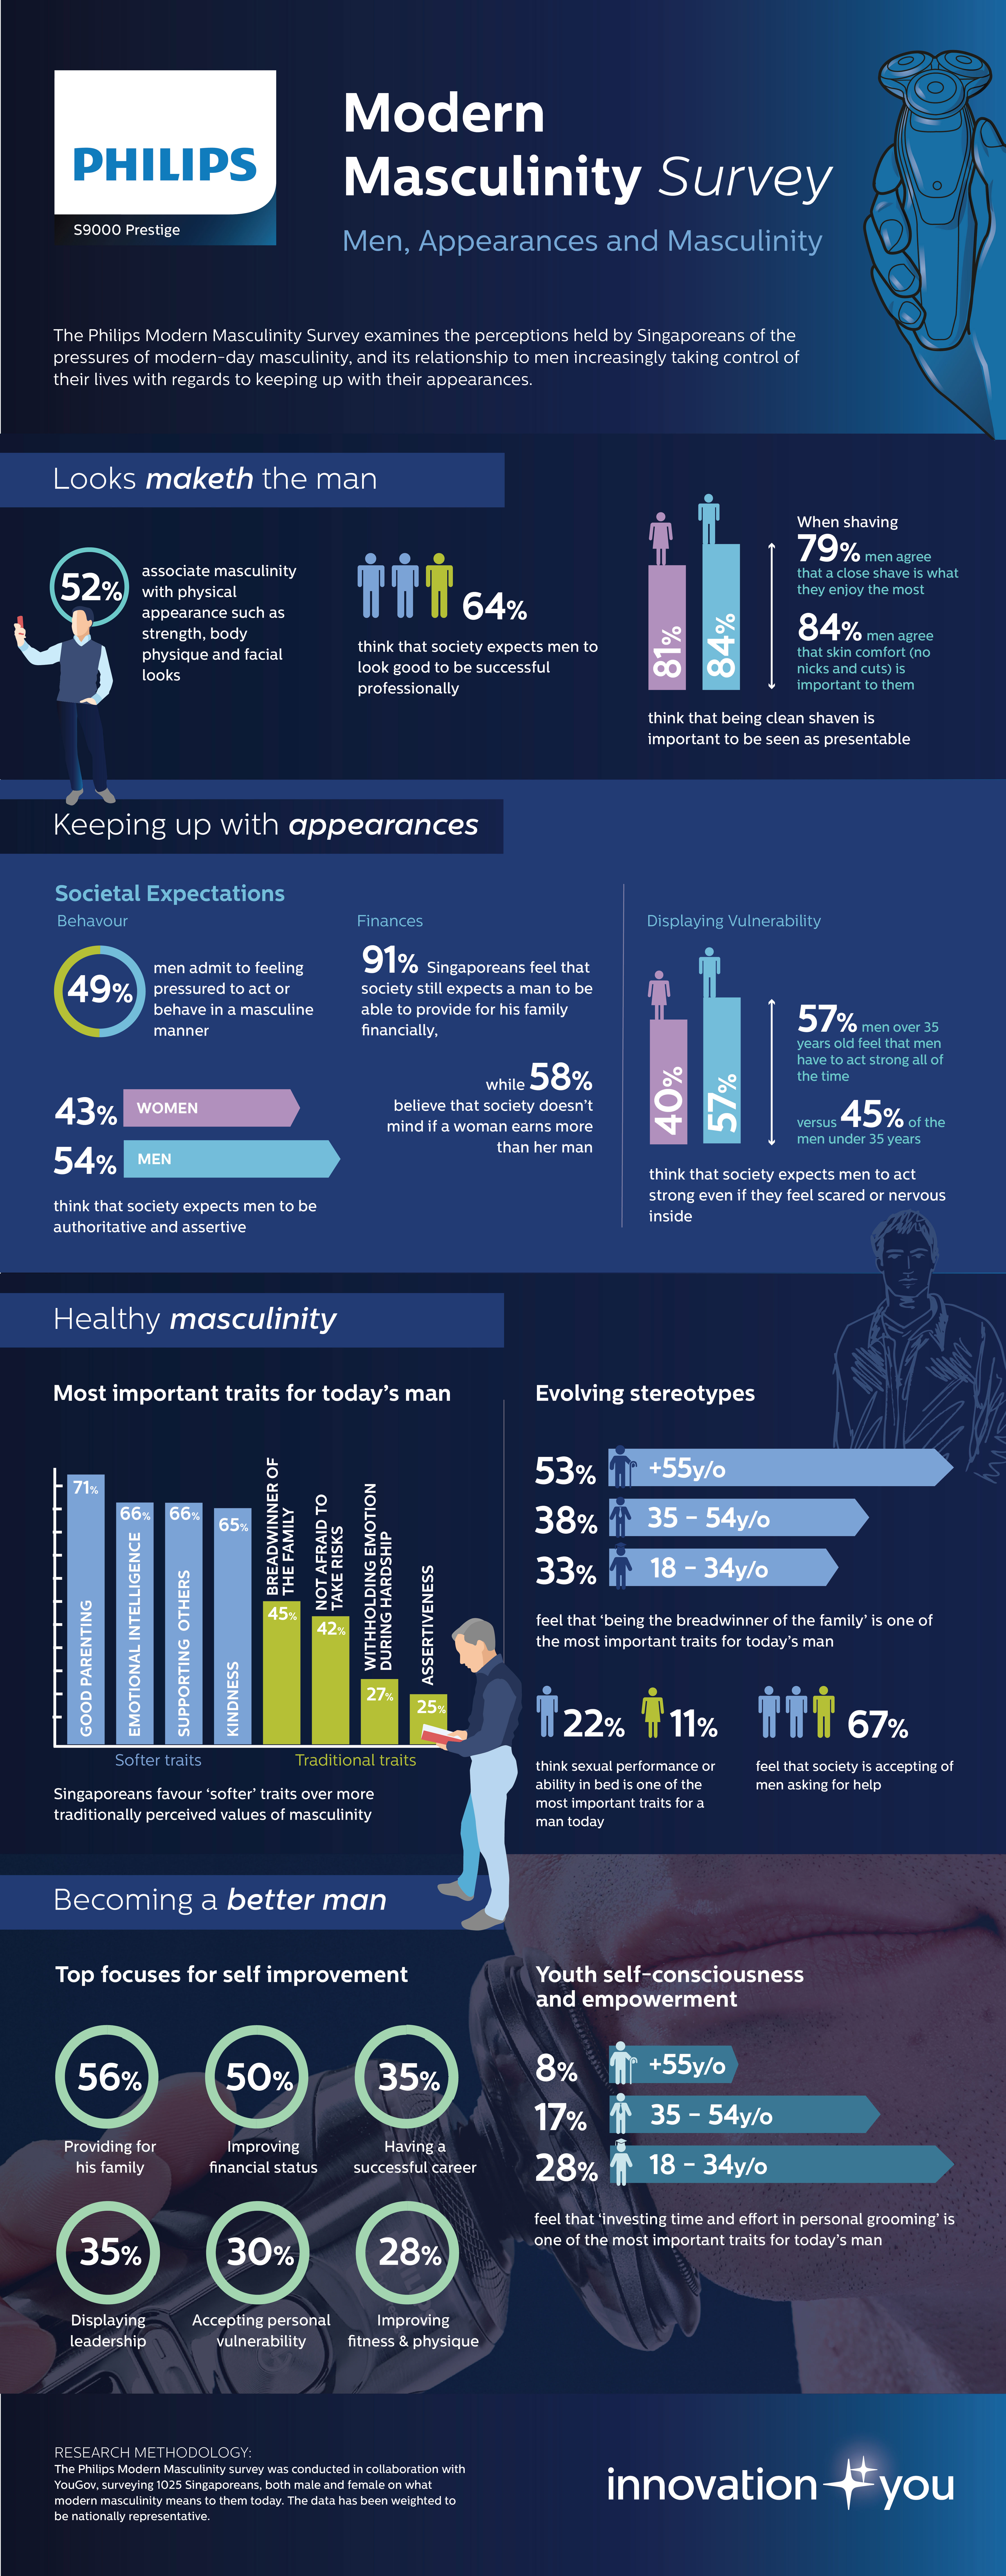 Download image (.jpg) Infographic Philips modern masculinity survey (opens in a new window)